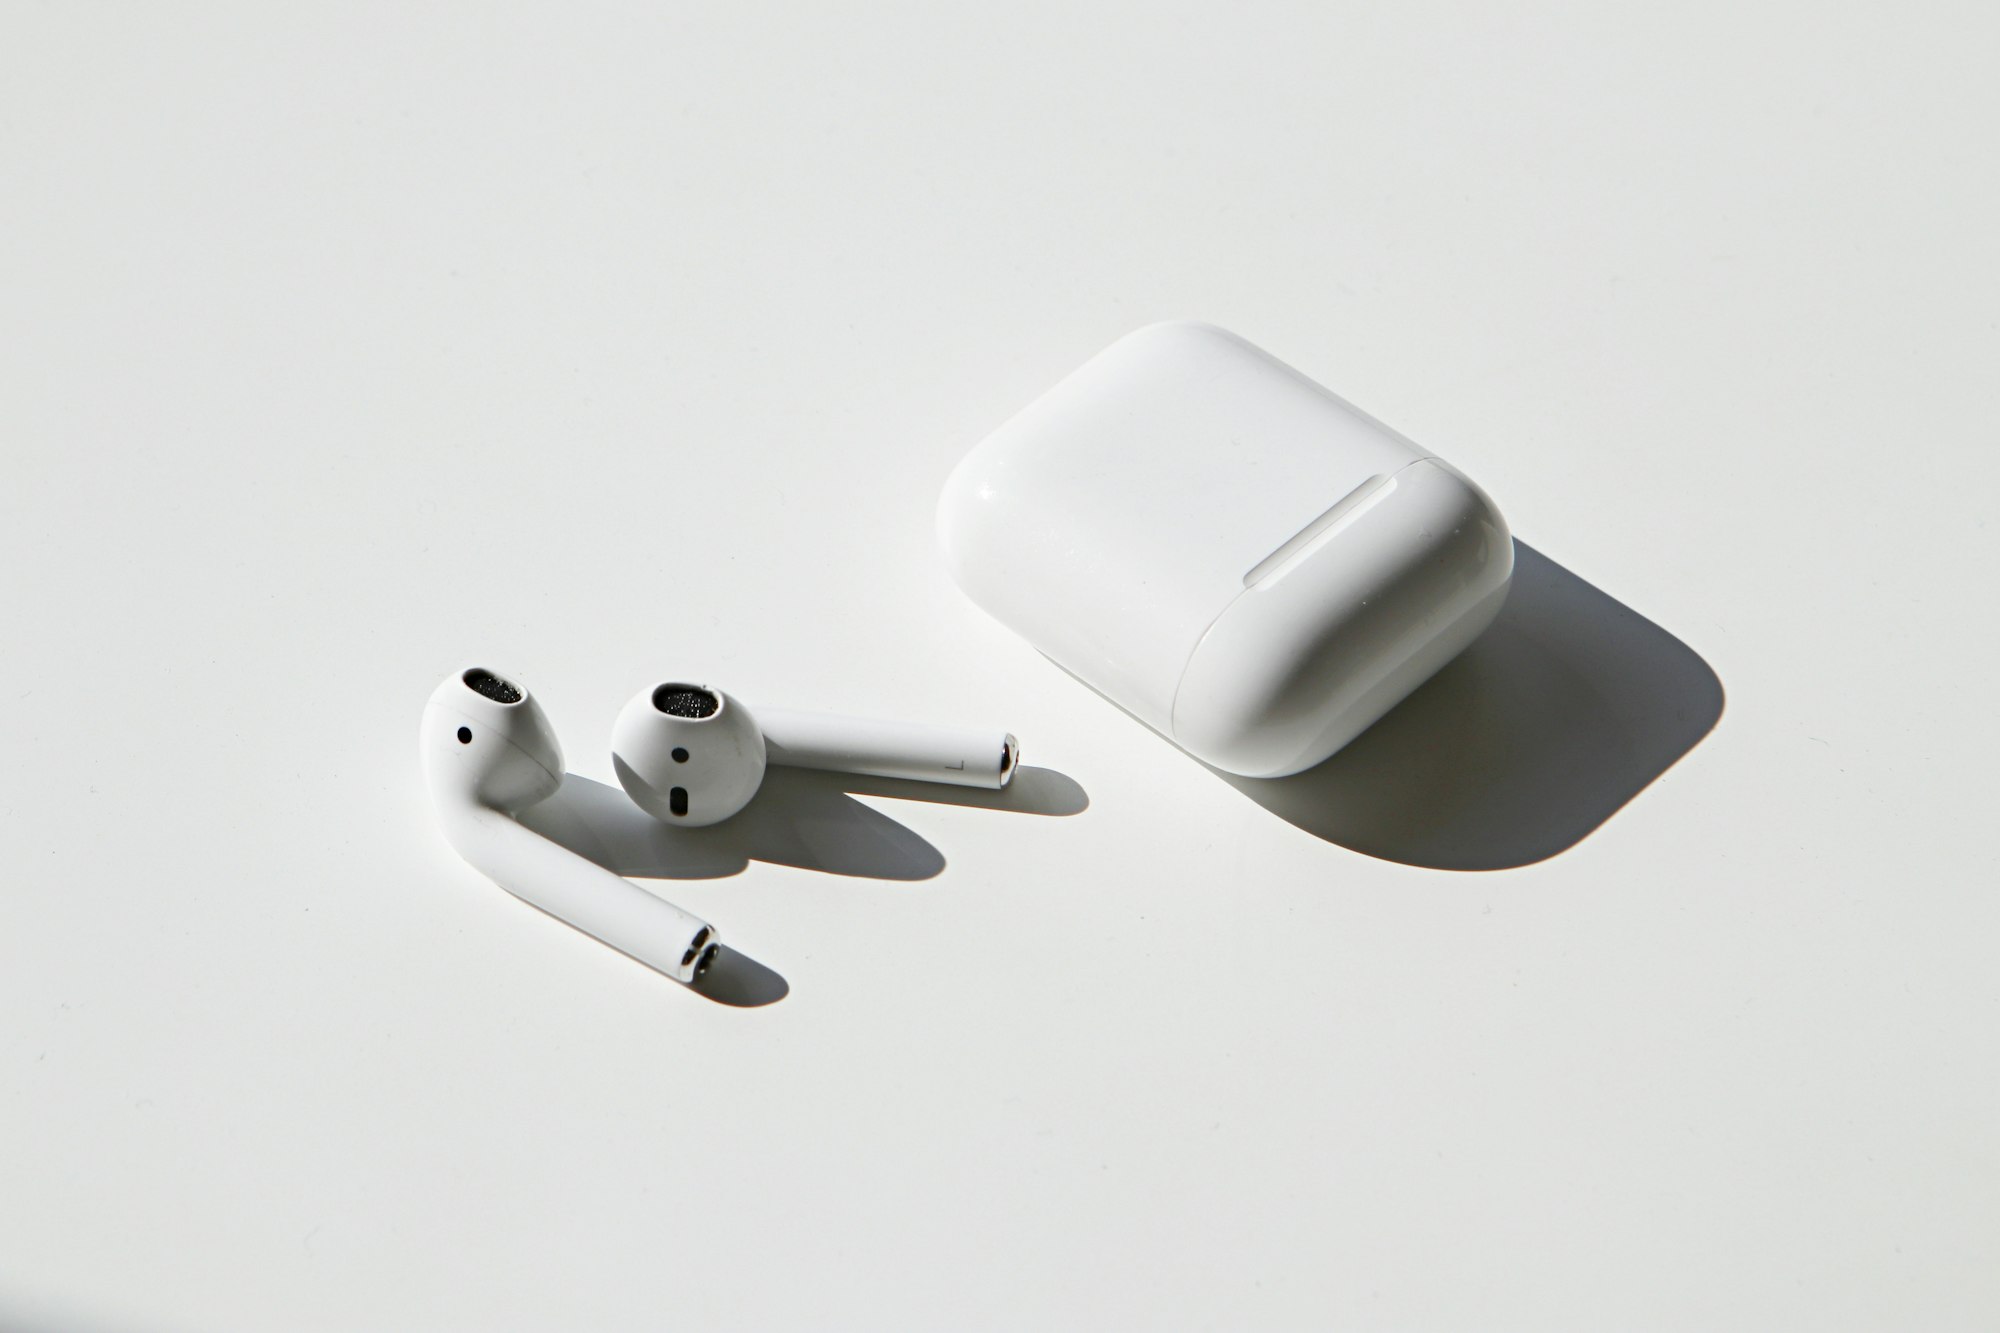 Photo of Apple AirPods on white table with case beside them.